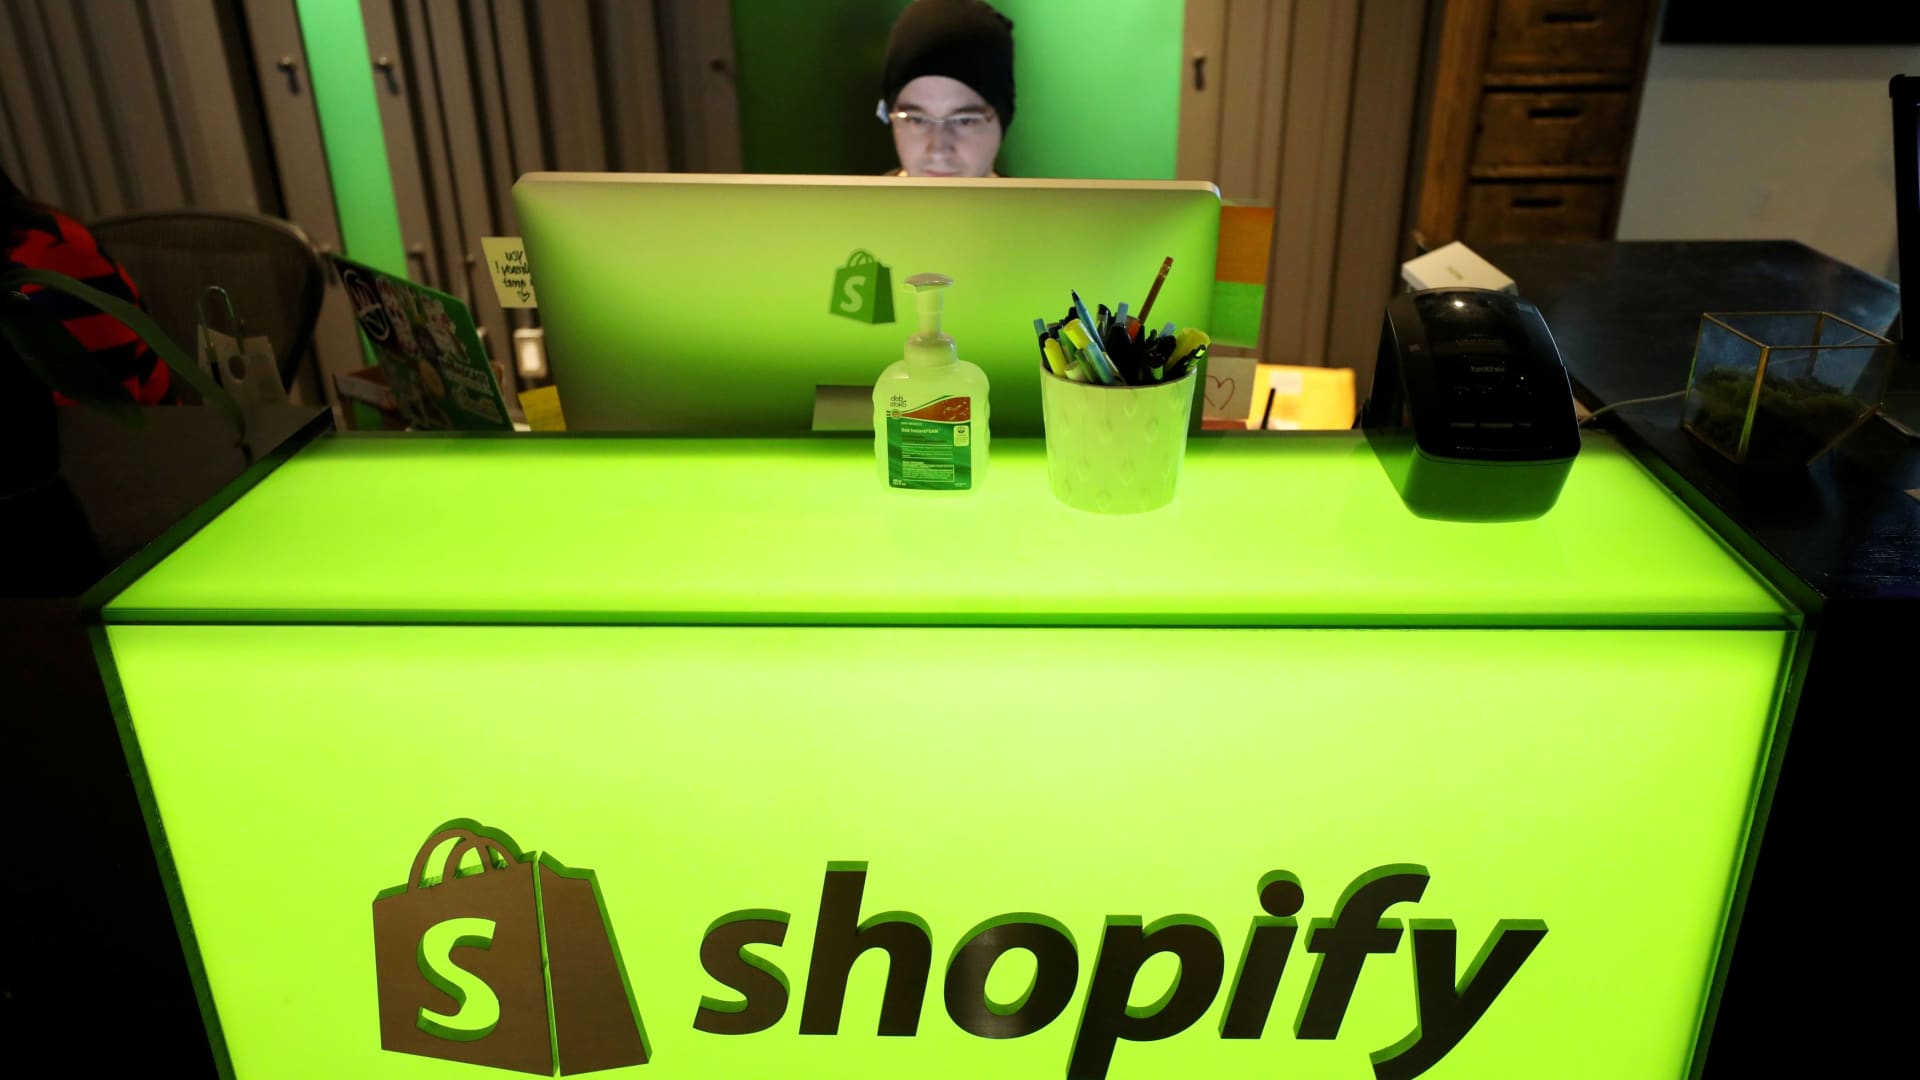 Shopify shares down after company reports light guidance